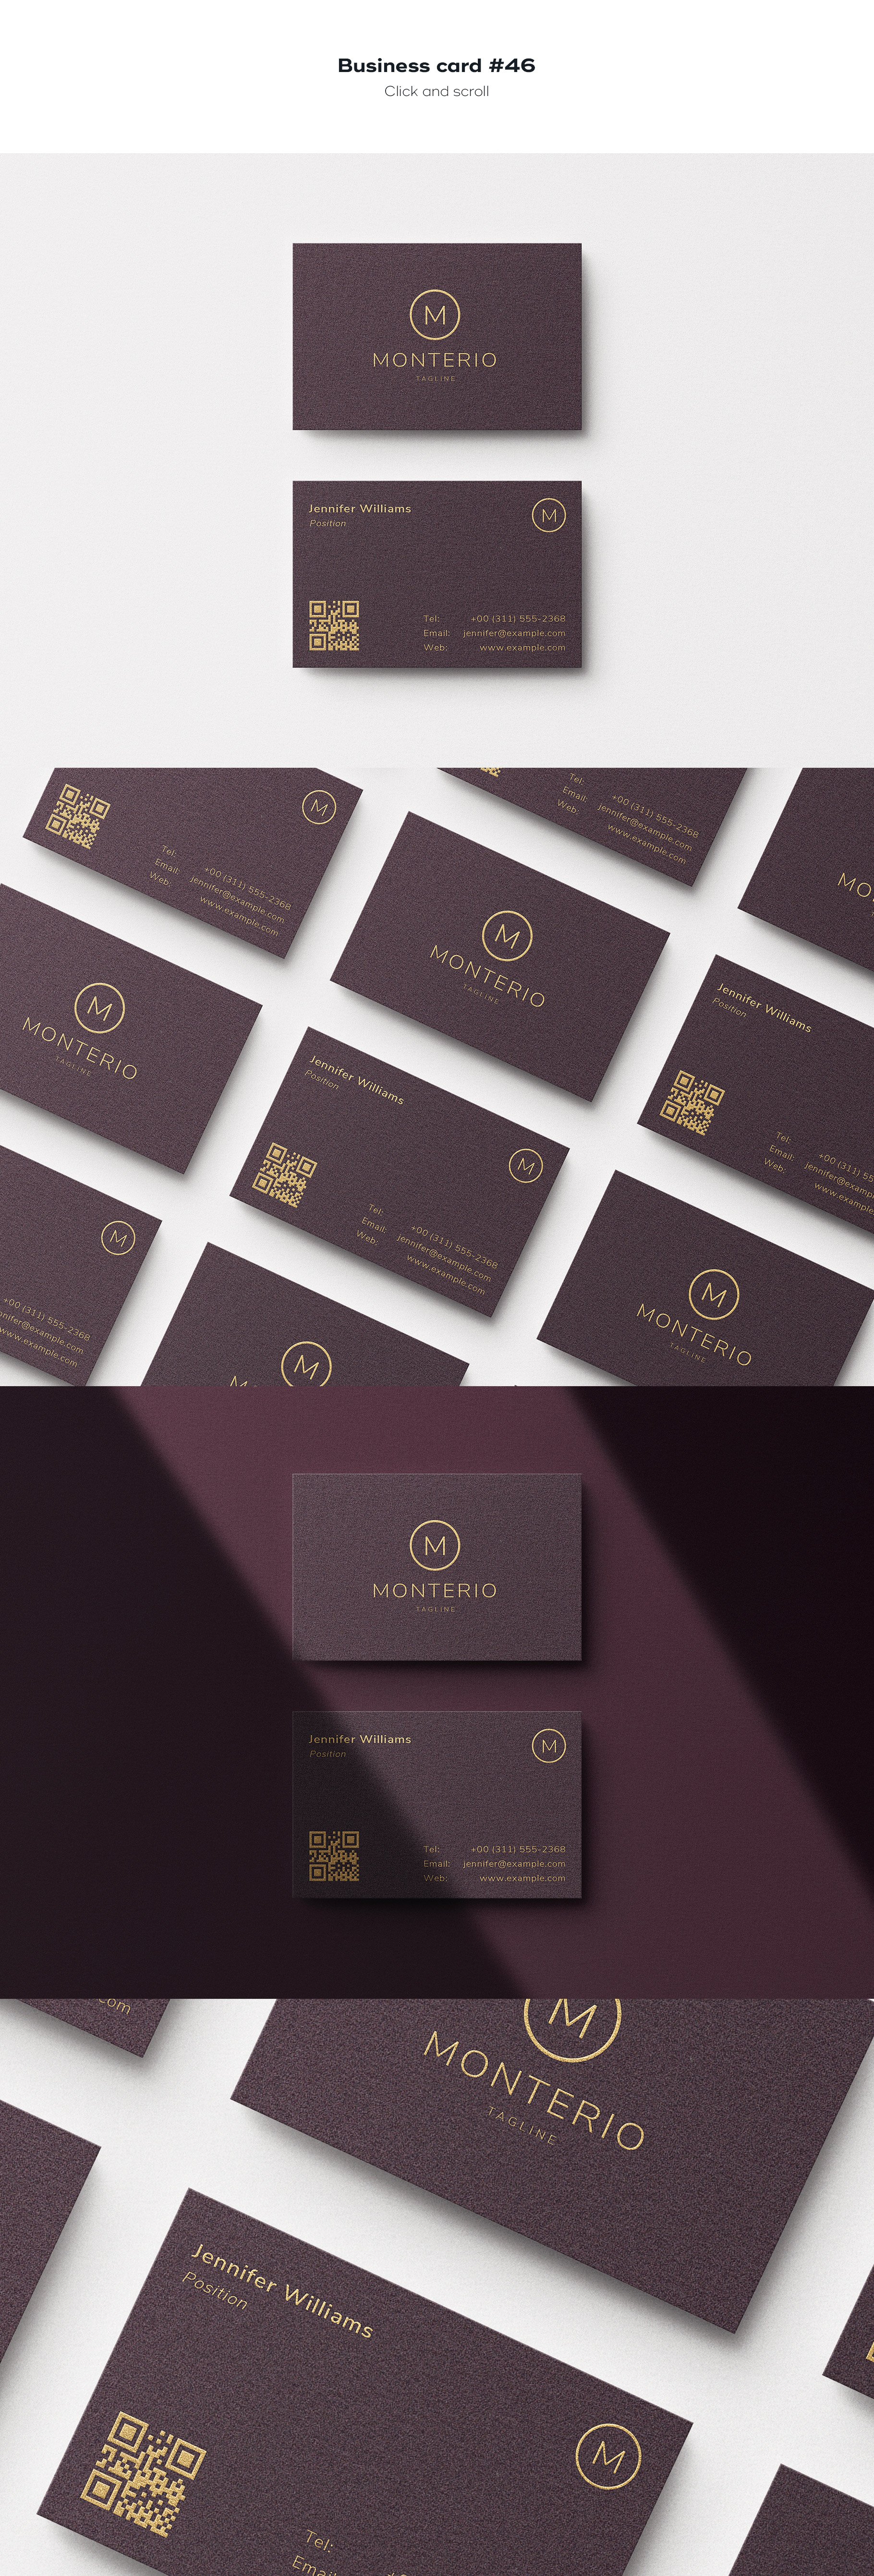 business card 46 860